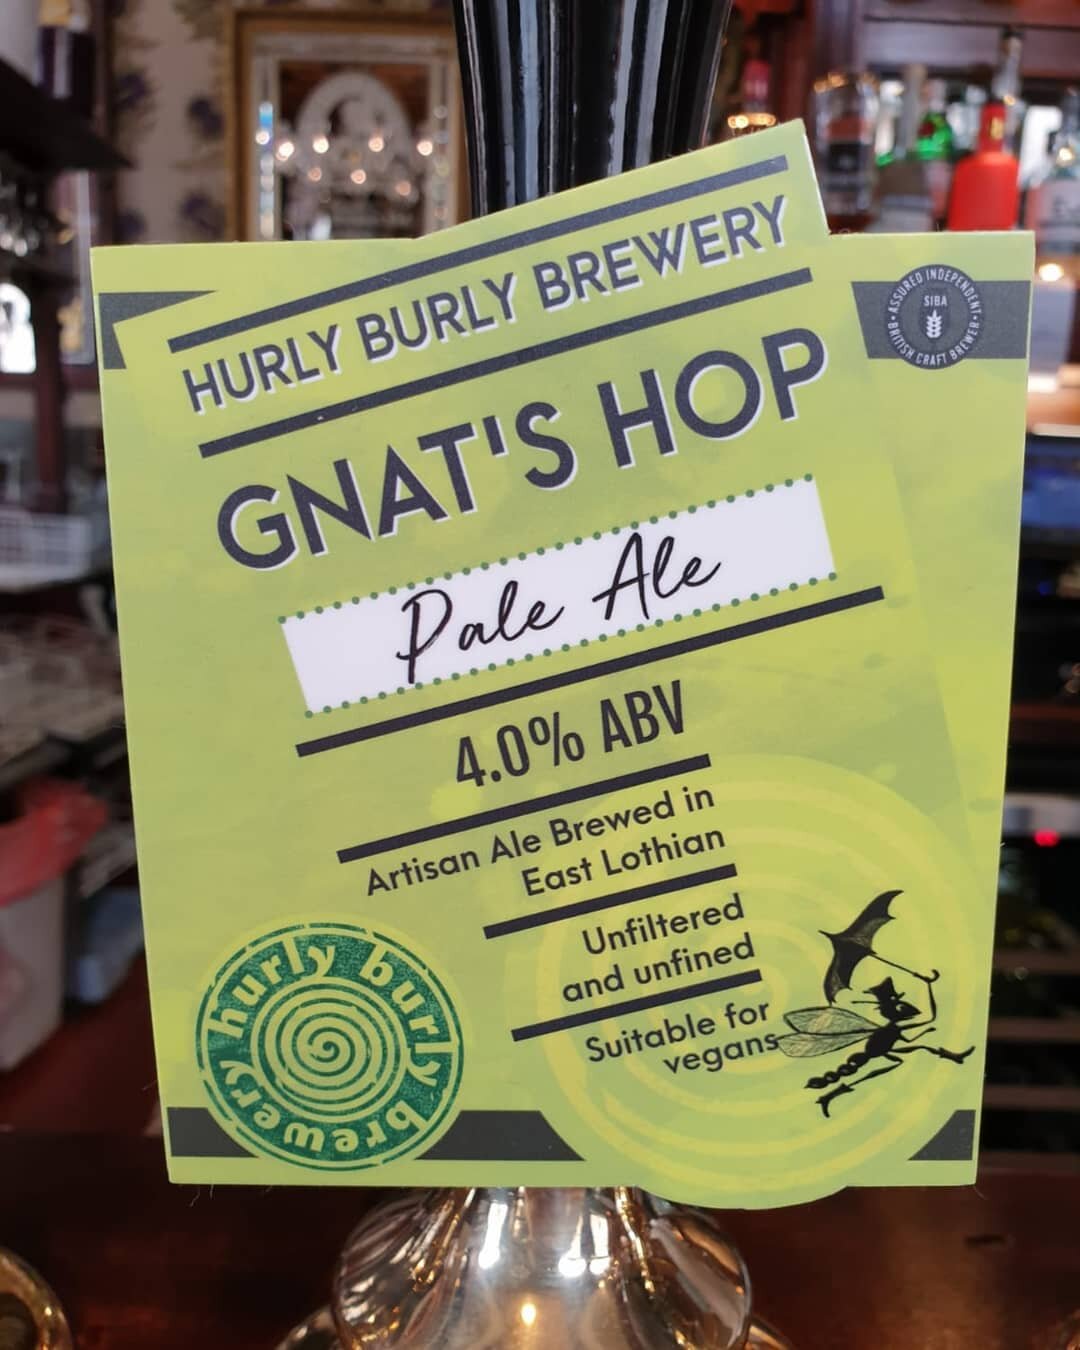 New on today from @hurlyburlybrewery #realale #realaleedinburgh #caskale #caskaleedinburgh #craftbeer #craftbeeredinburgh #edinburghbeer #edinburghpubs #hurlyburlybrewery #paleale